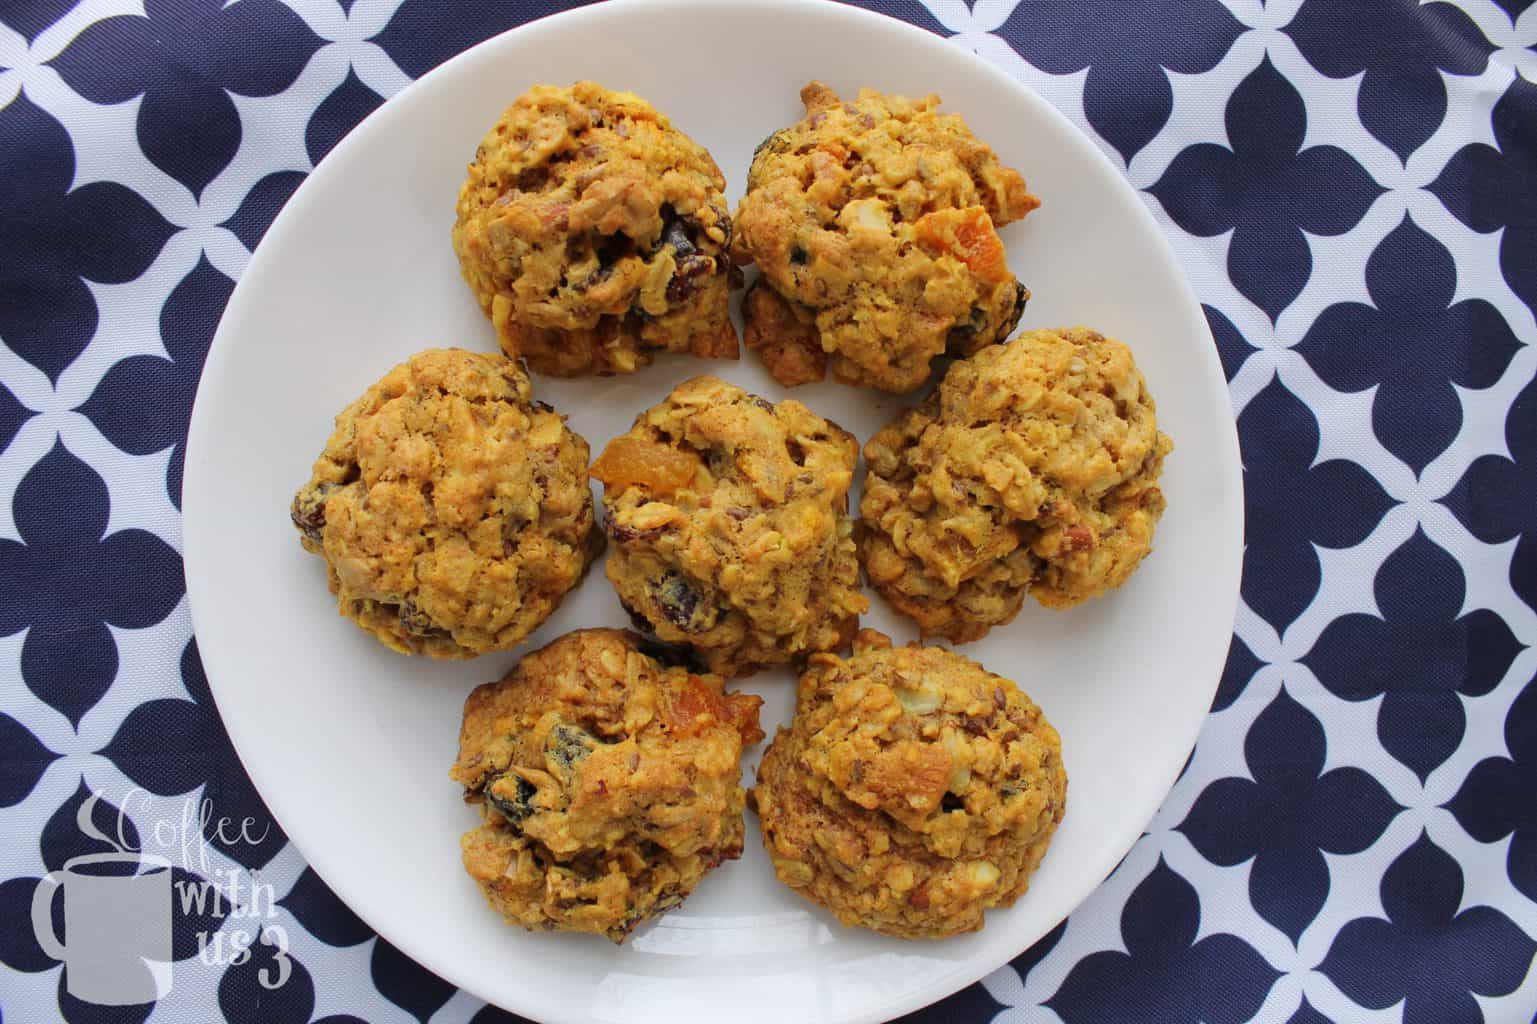 Who doesn't want to eat cookies for breakfast?  With these Sunrise Breakfast Cookies, you can!  Packed with oats, nuts, seeds, dried fruit, and more, they're very filling!